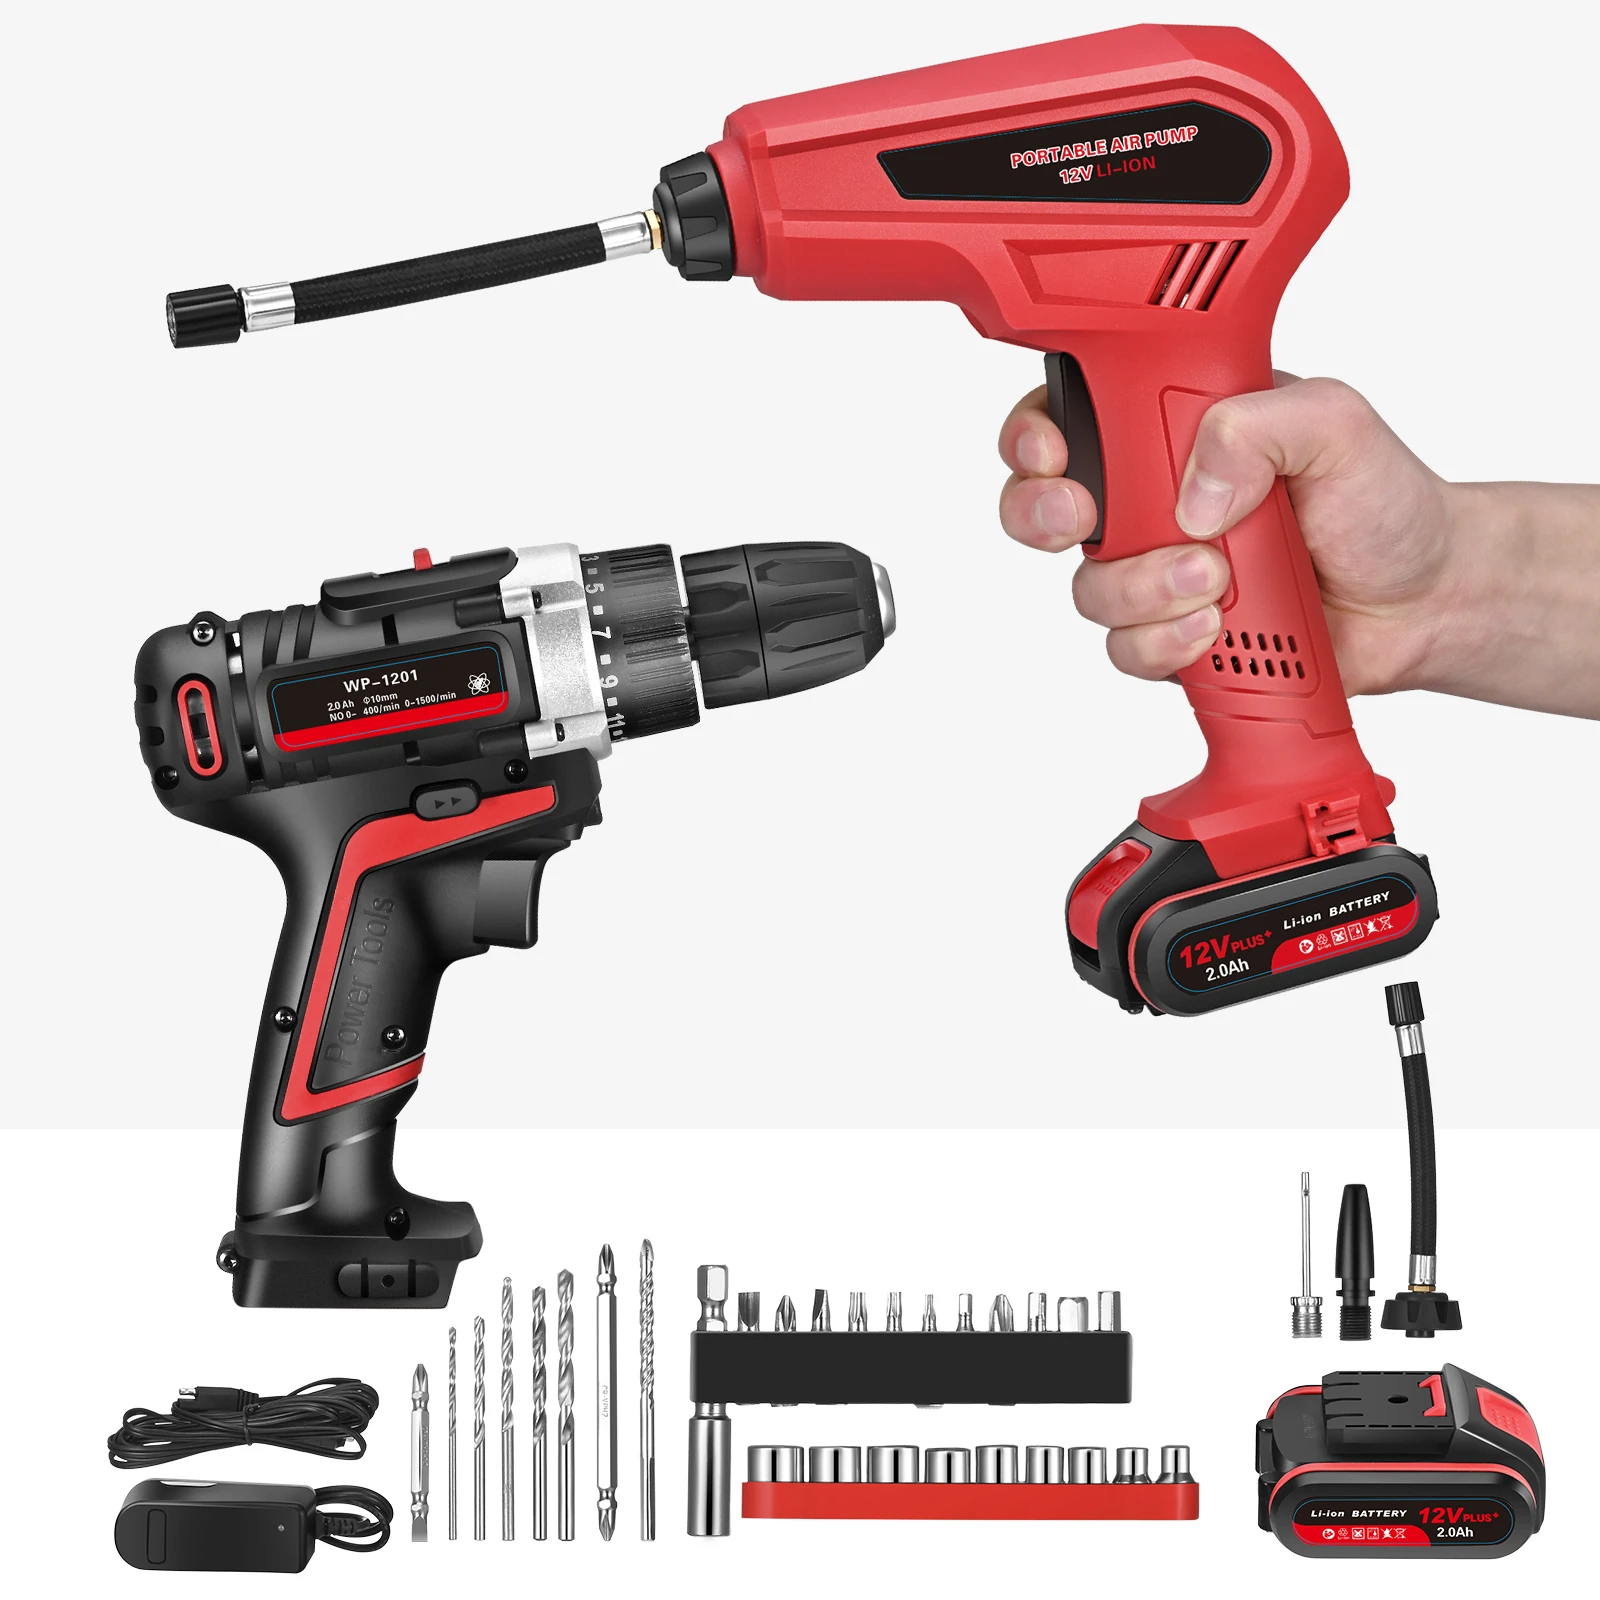 Rechargeable Craft 12V Screwdriver Cordless Power Drill with Tire Inflator pump